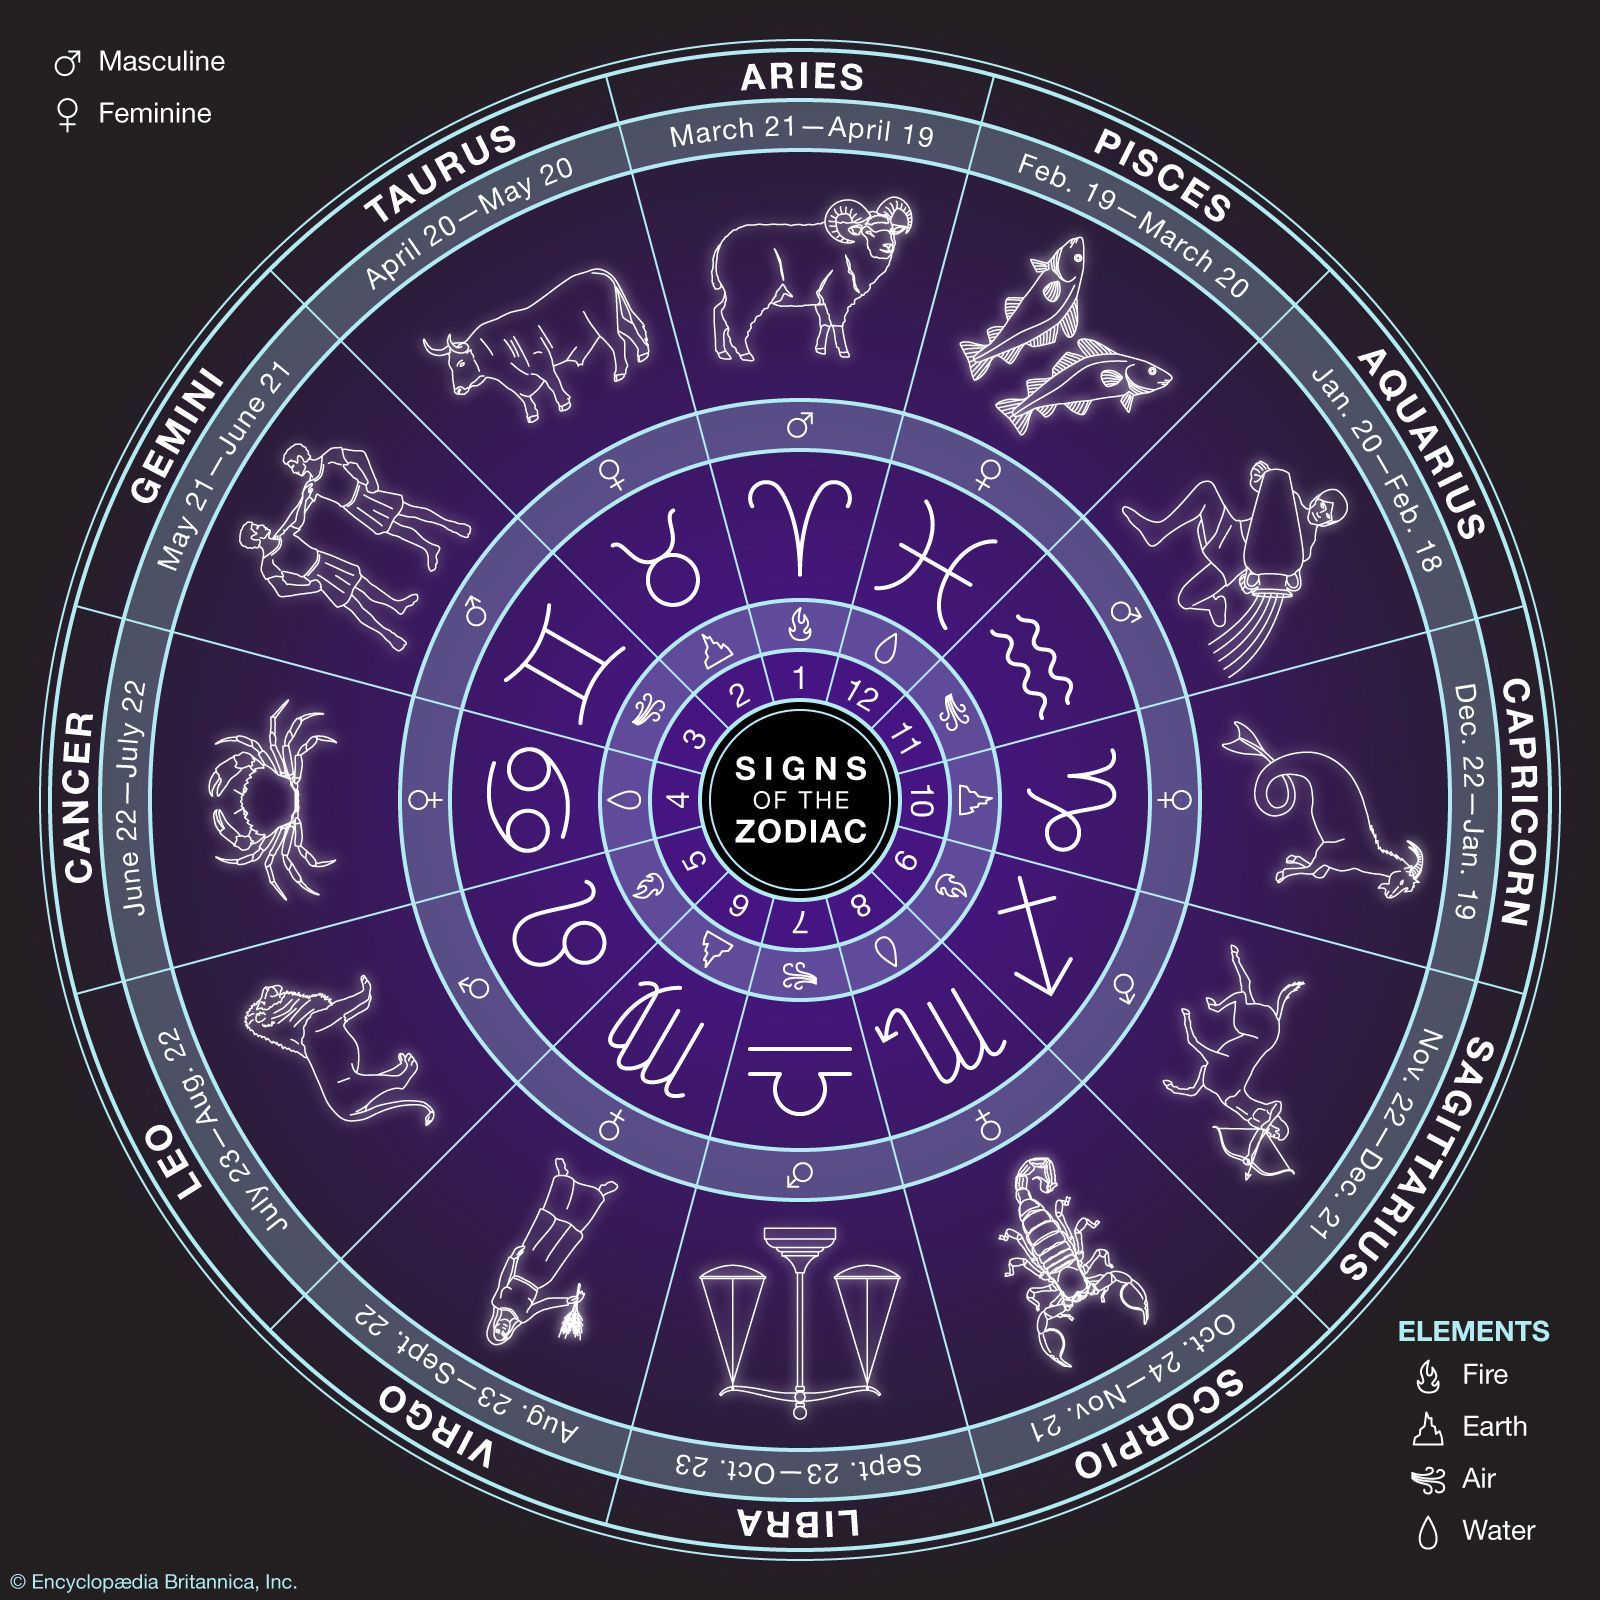 How many zodiac signs exist?